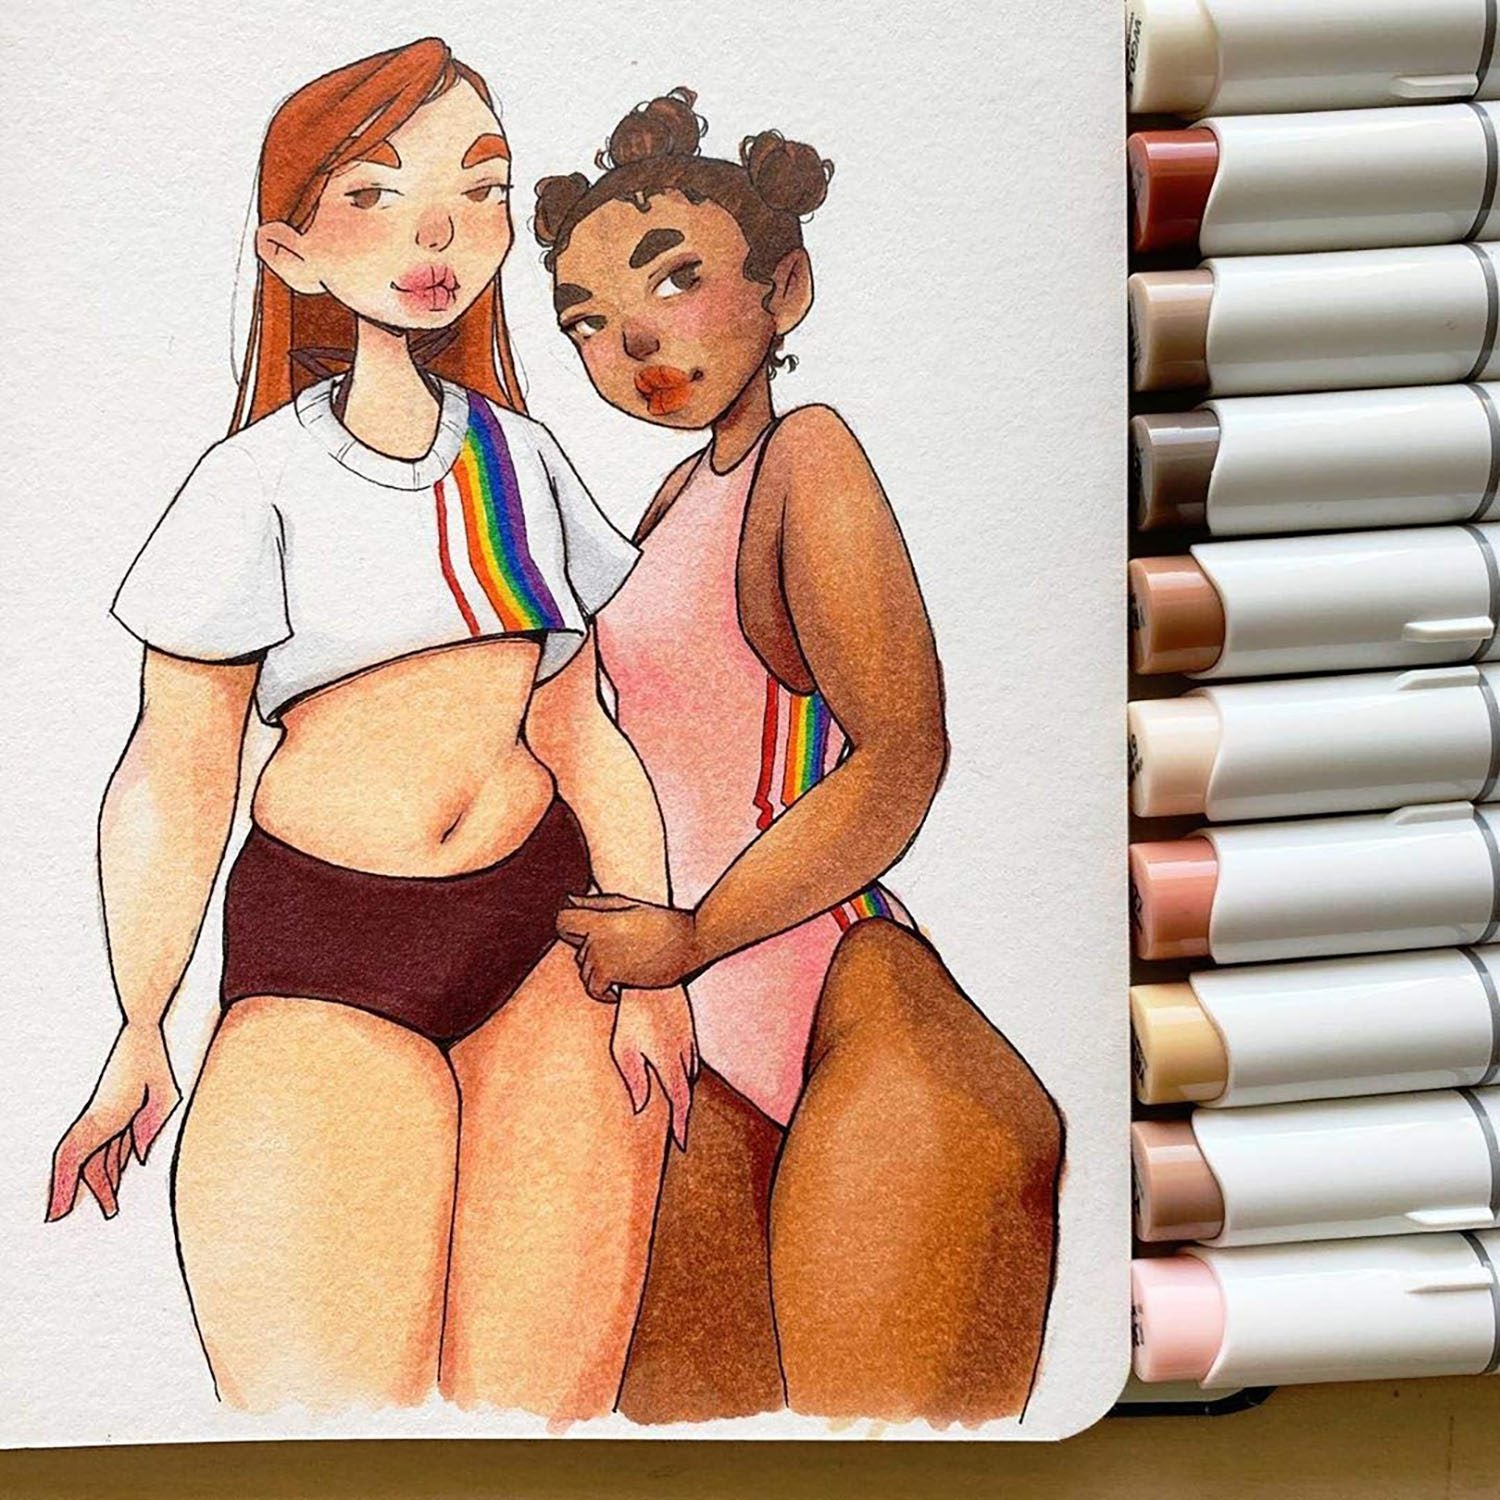 OHUHU Skin Tones Alcohol Markers 36 Set Best Combos - Coloring with Miss  Martly 's Ko-fi Shop - Ko-fi ❤️ Where creators get support from fans  through donations, memberships, shop sales and